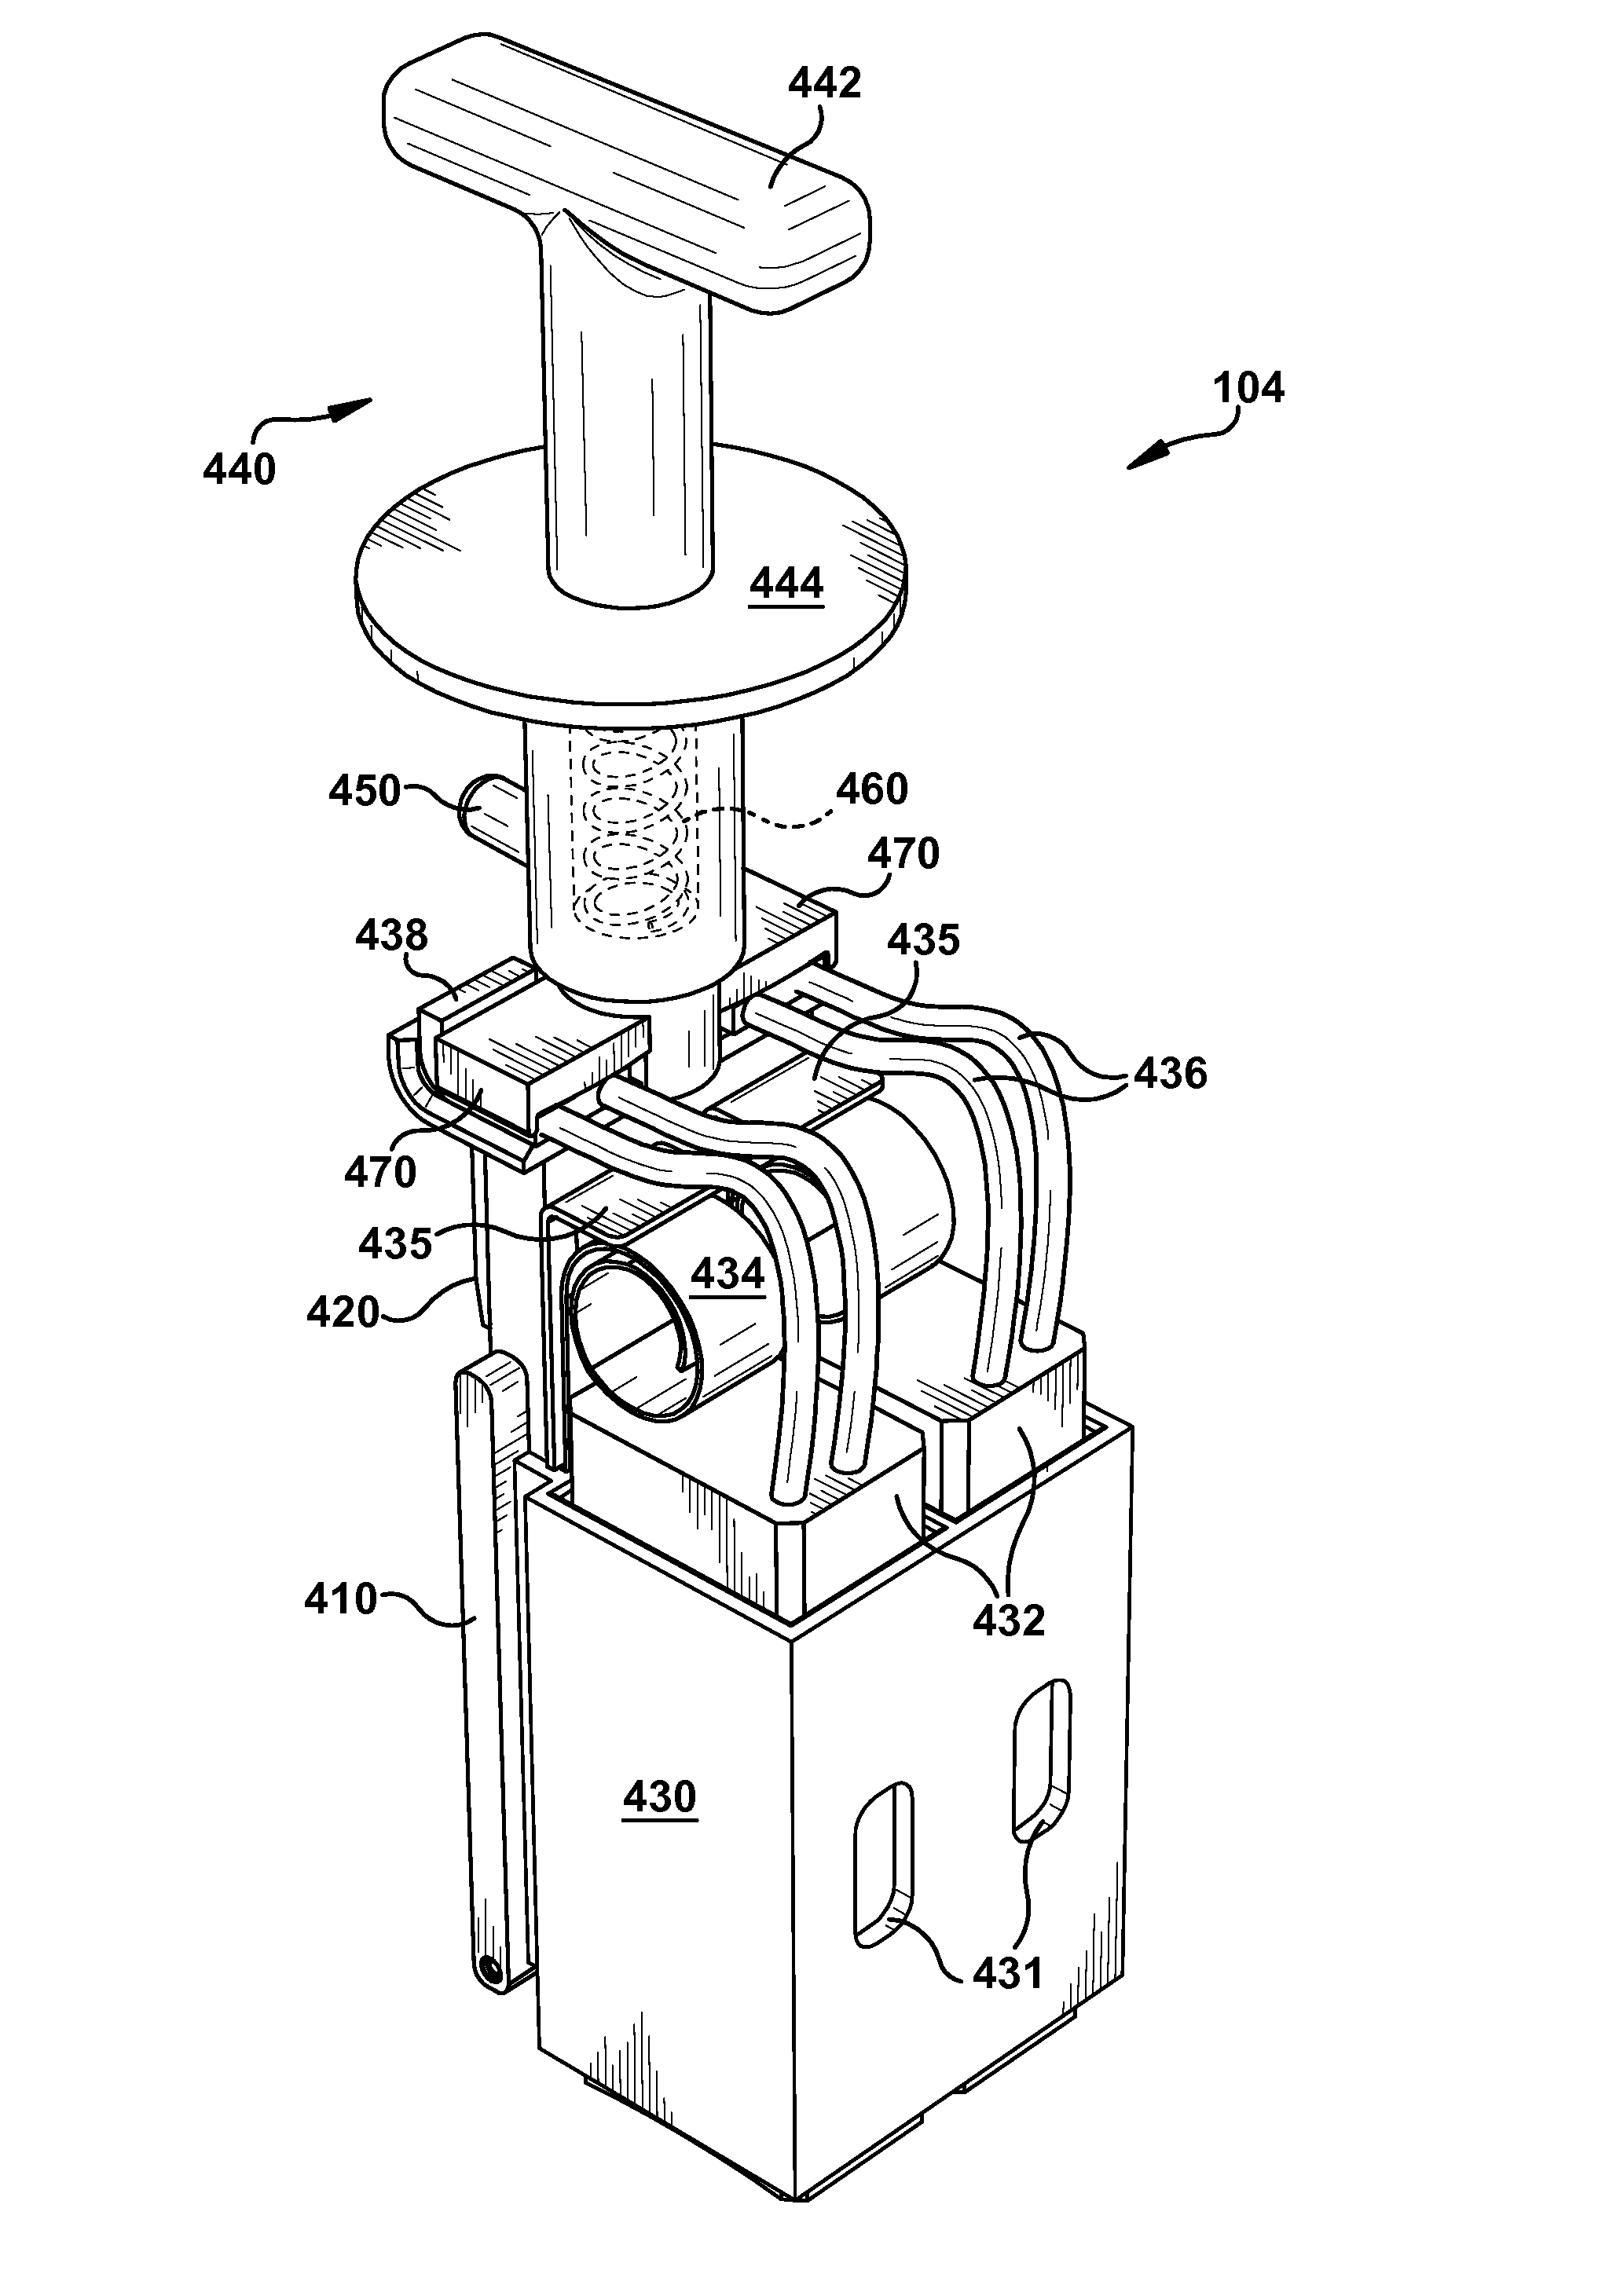 Brush holder apparatus and system